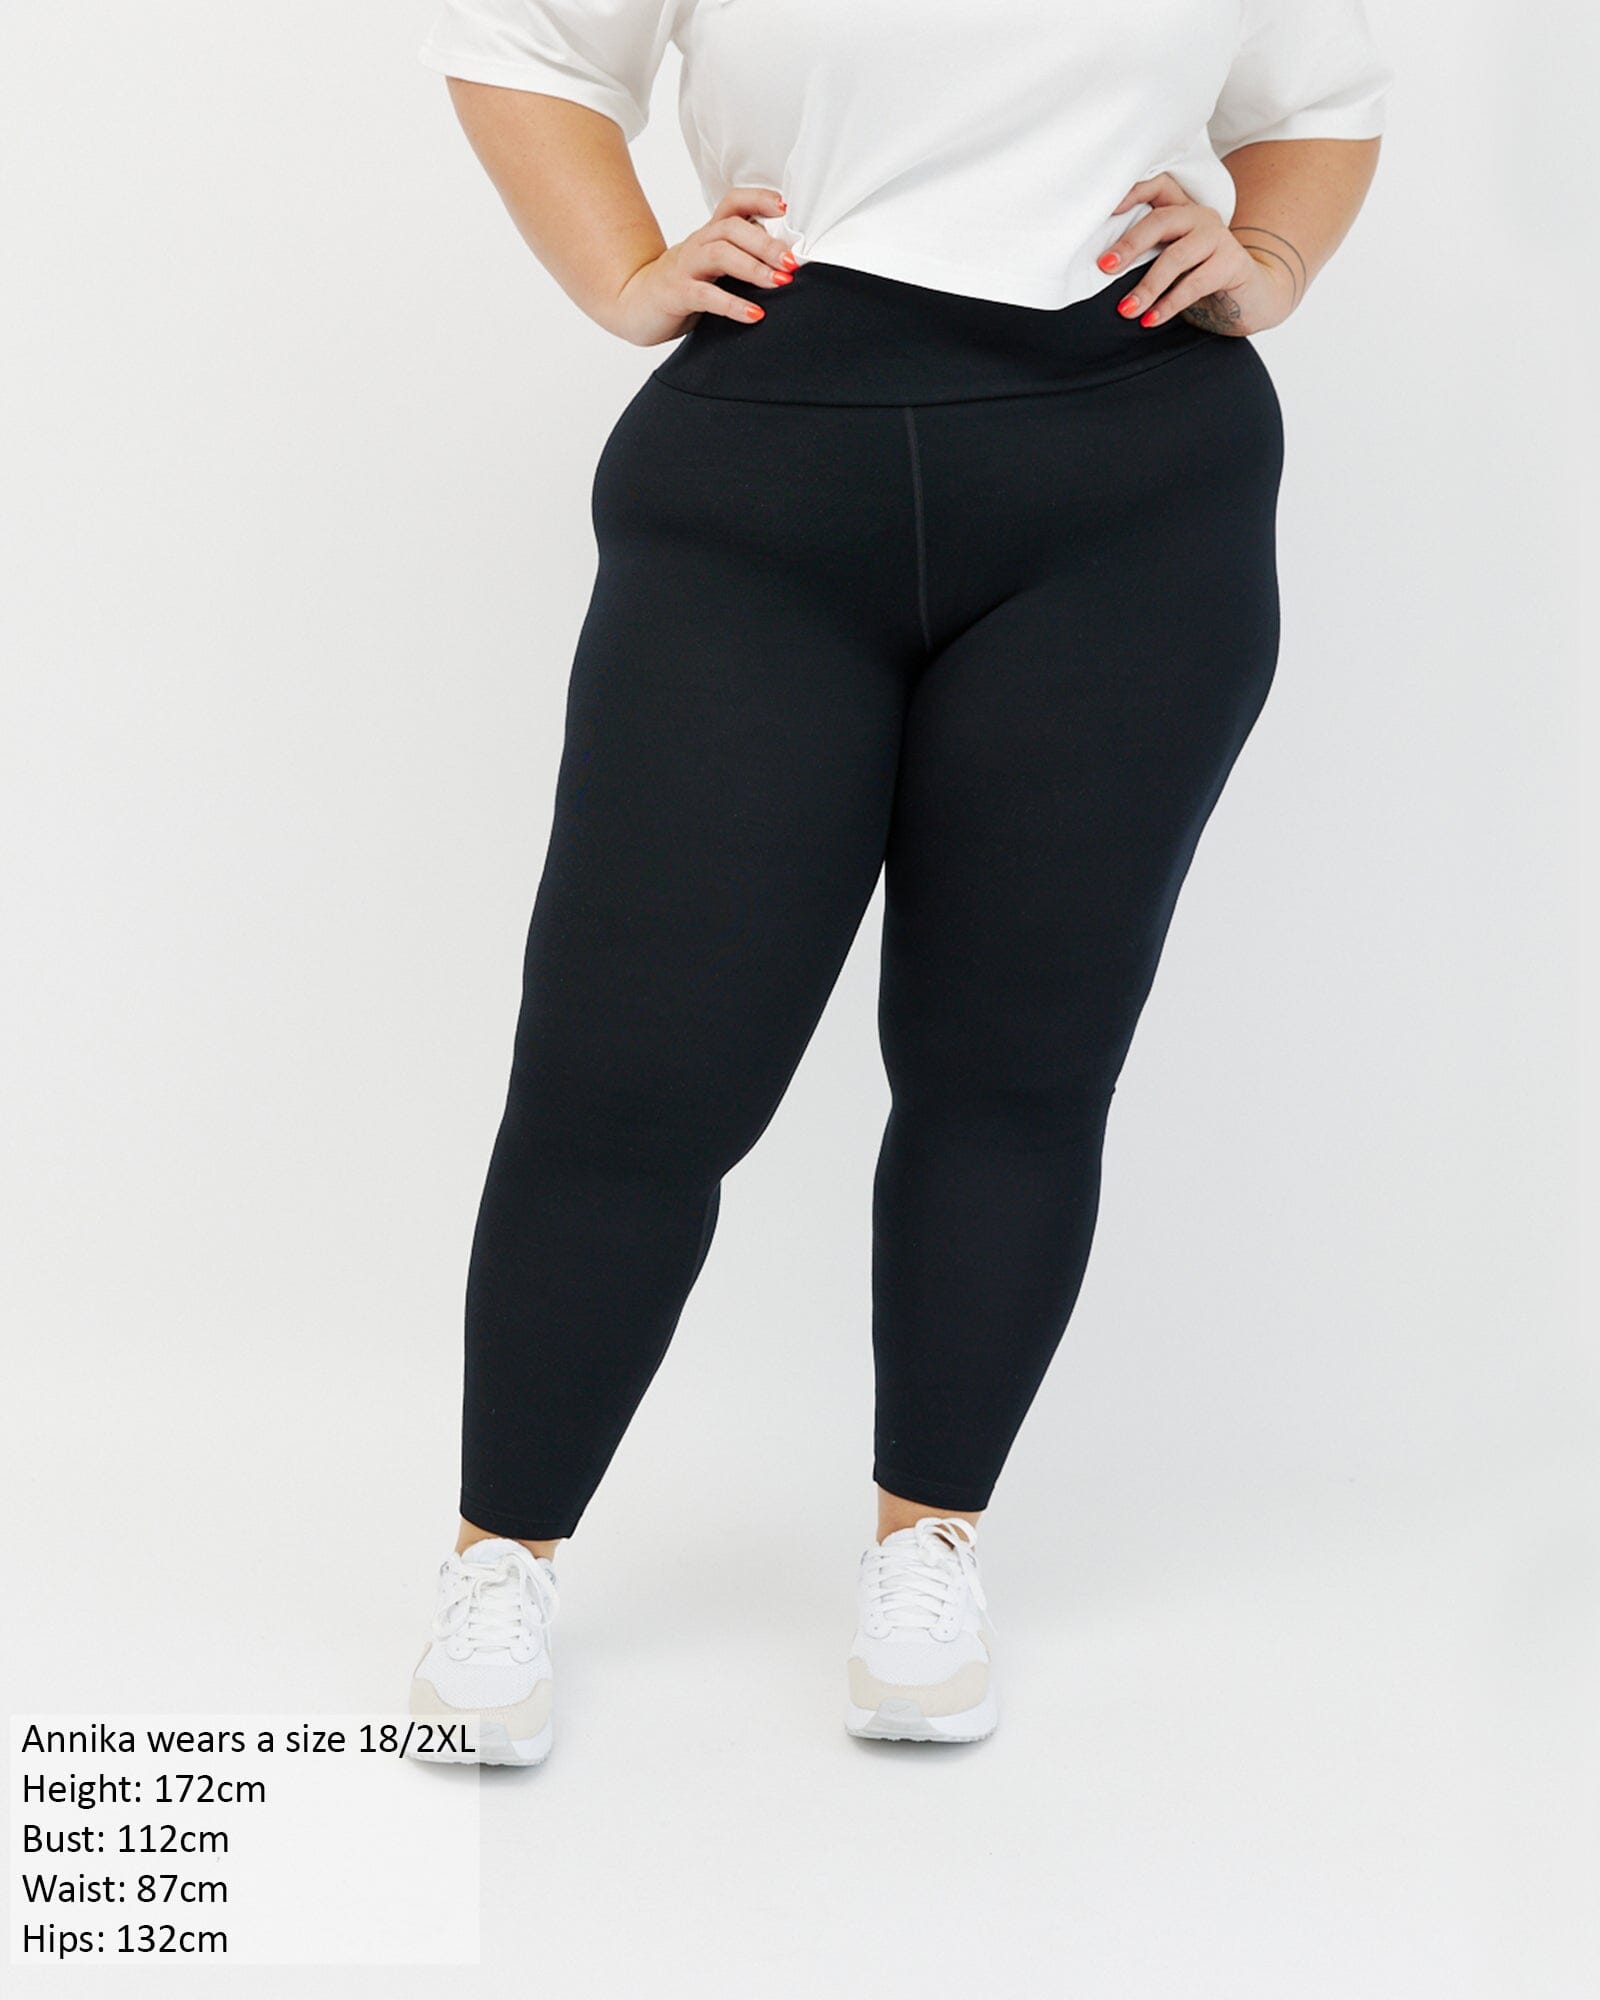 These leggings are 'super comfy' and 'flattering' — and they're 51